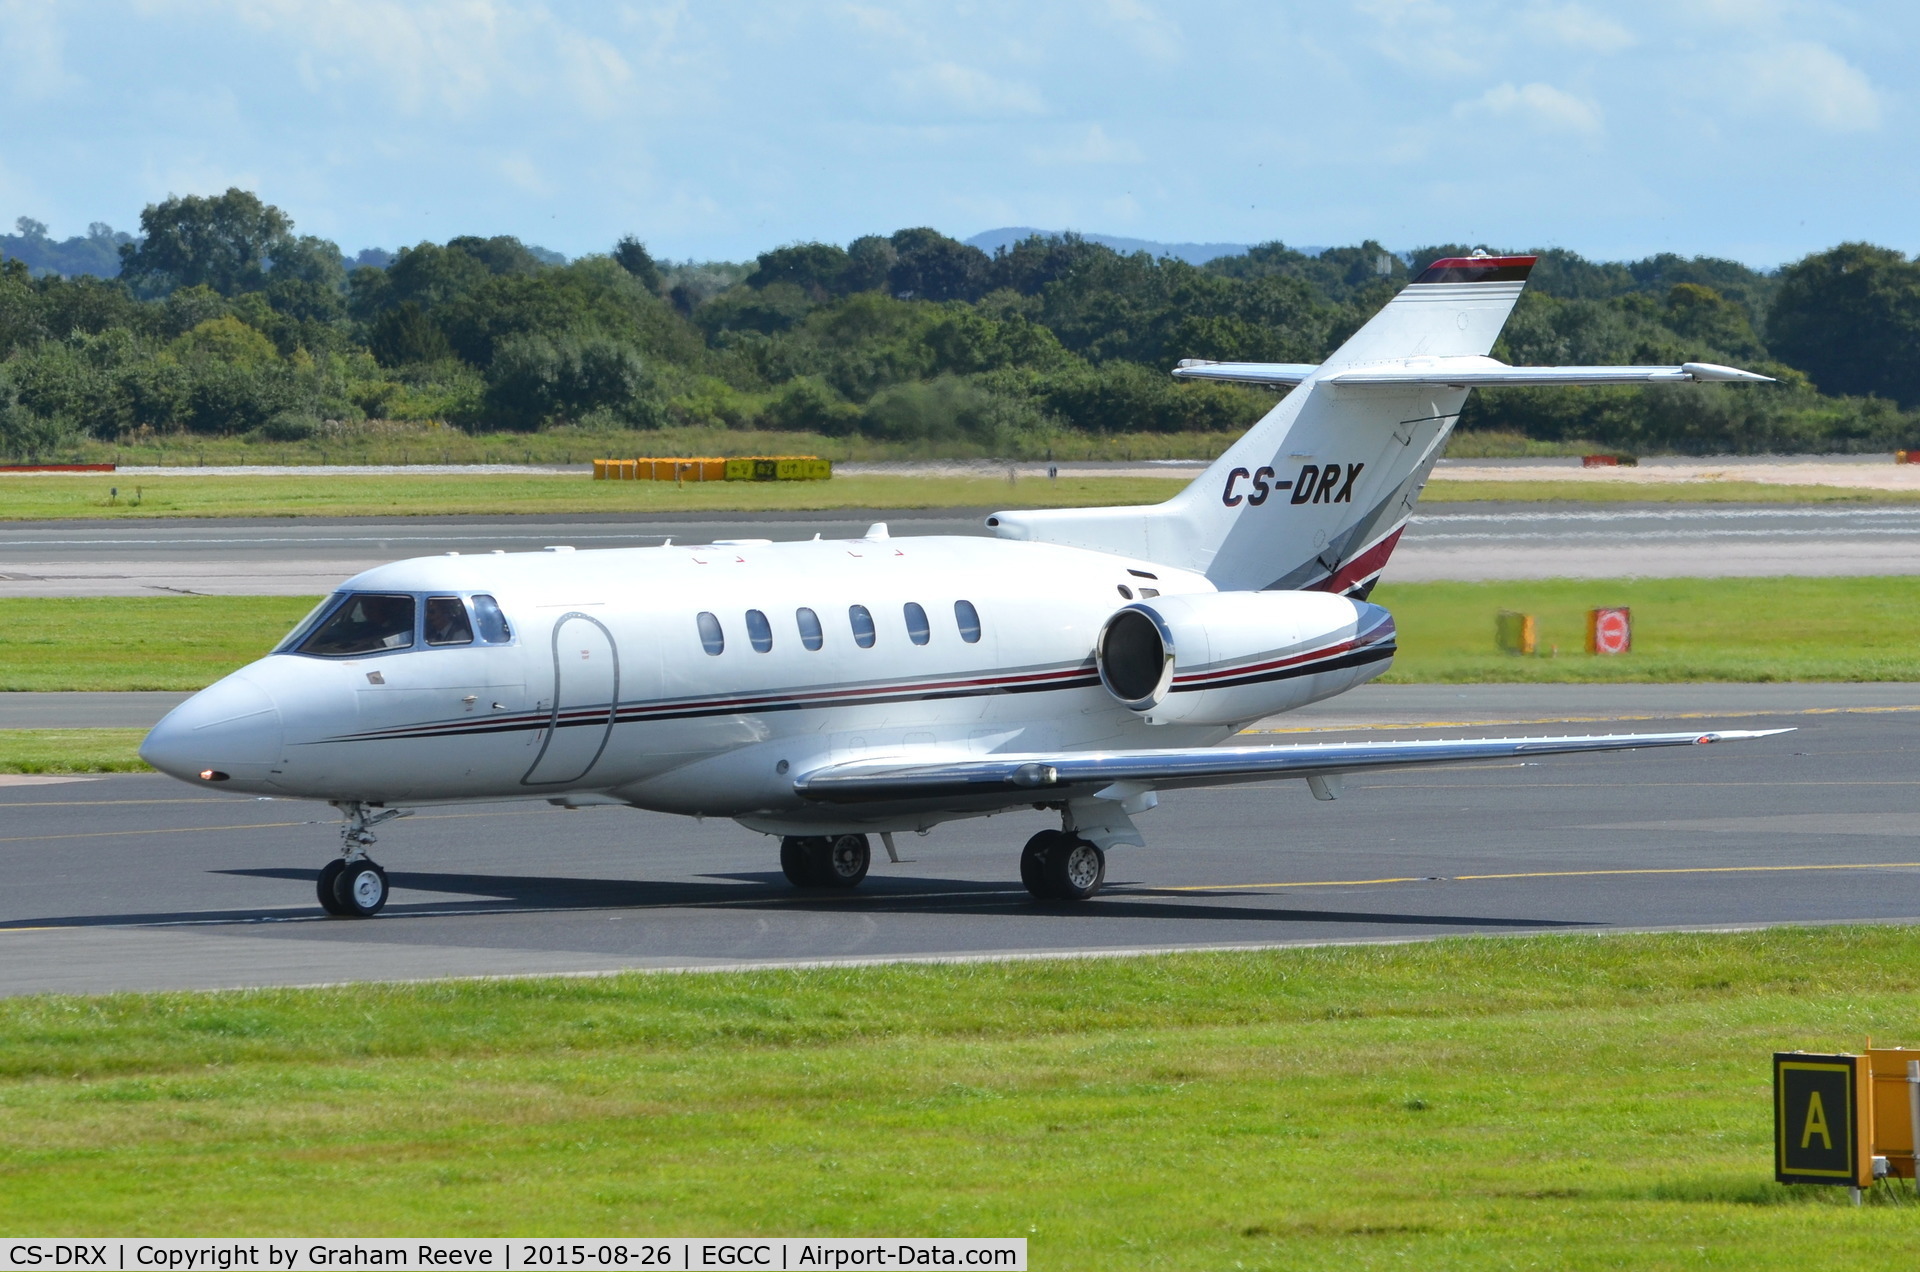 CS-DRX, 2007 Raytheon Hawker 800XP C/N 258834, Just landed at Manchester.